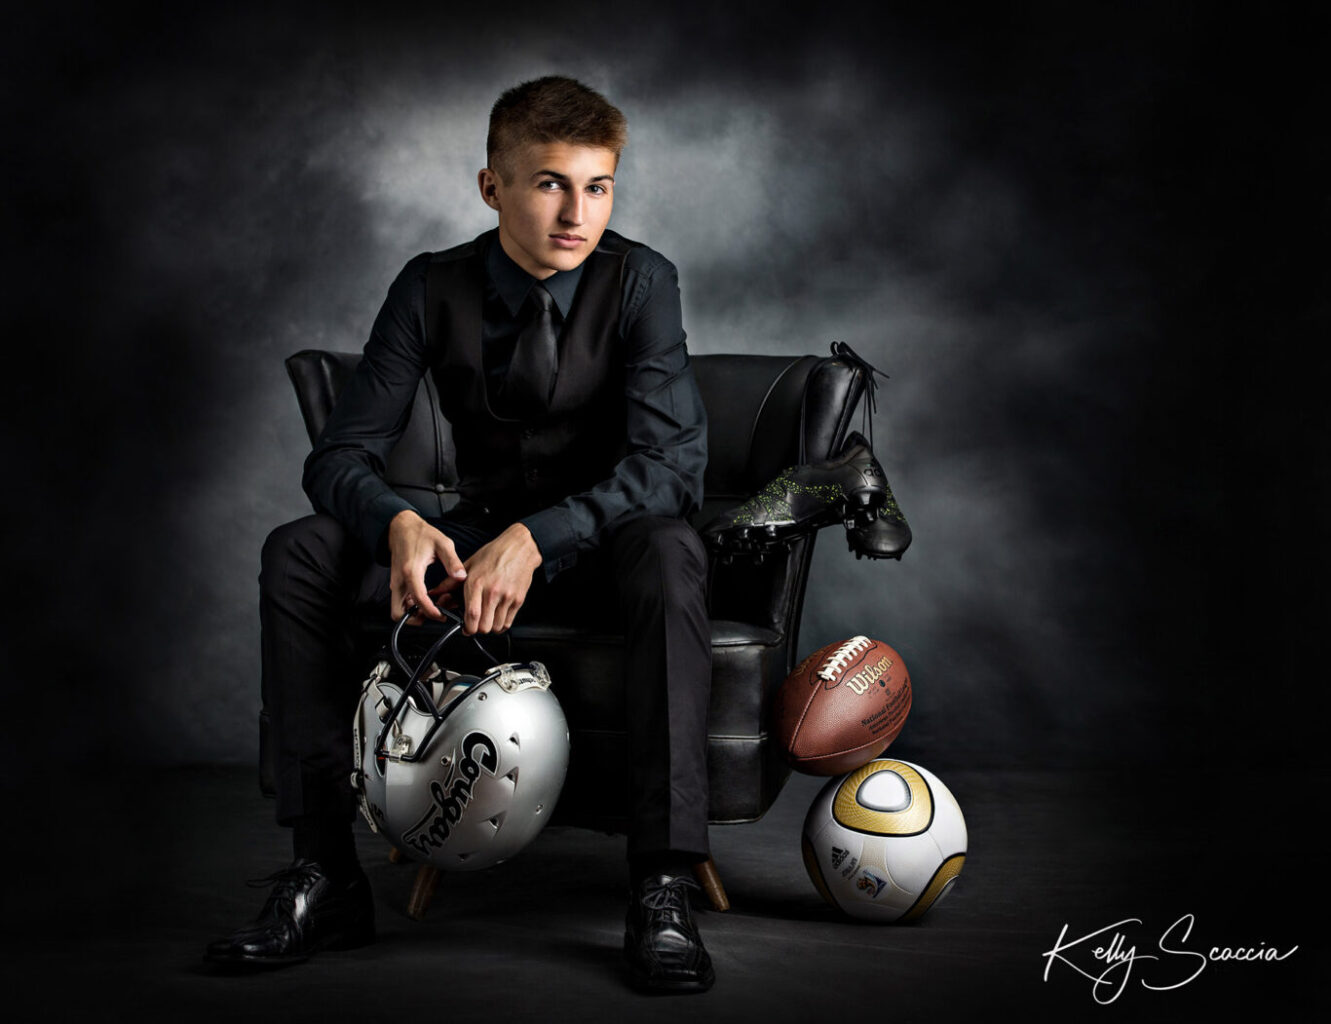 High School senior guy in studio wearing black suit sitting in chair with football helmet, cleats, football and soccer ball